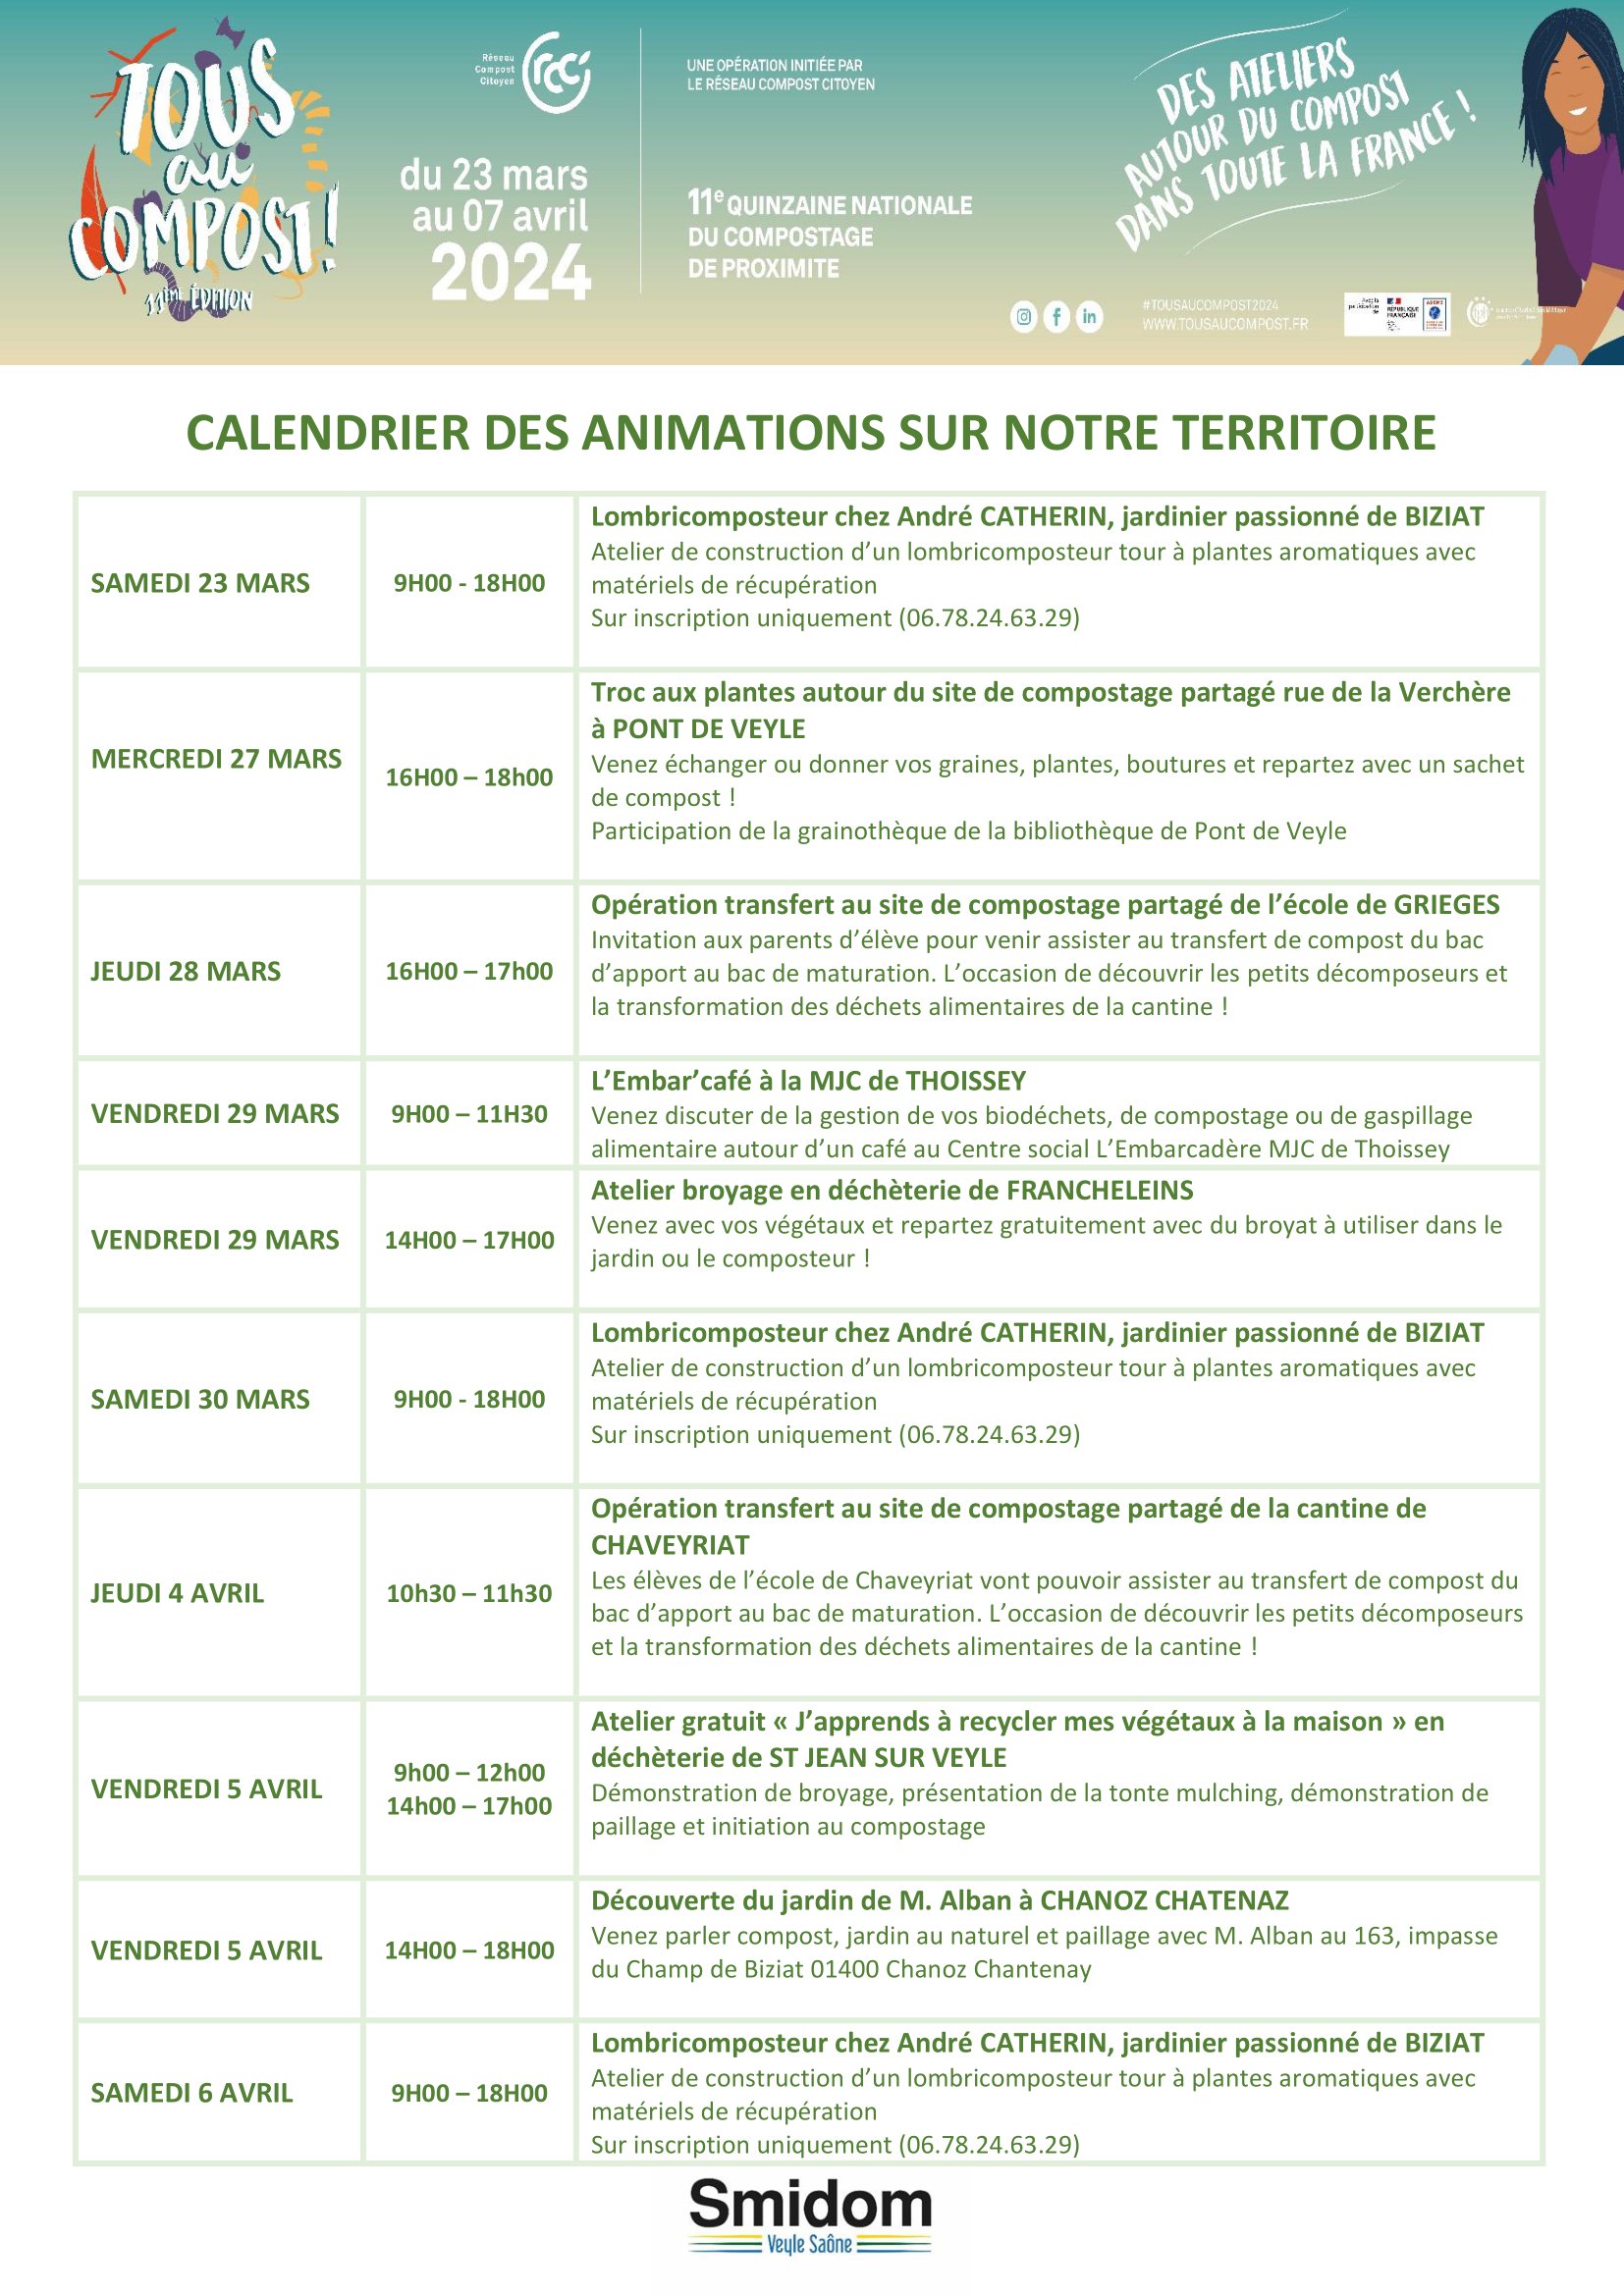 CALENDRIER DES ANIMATIONS 2024.jpg